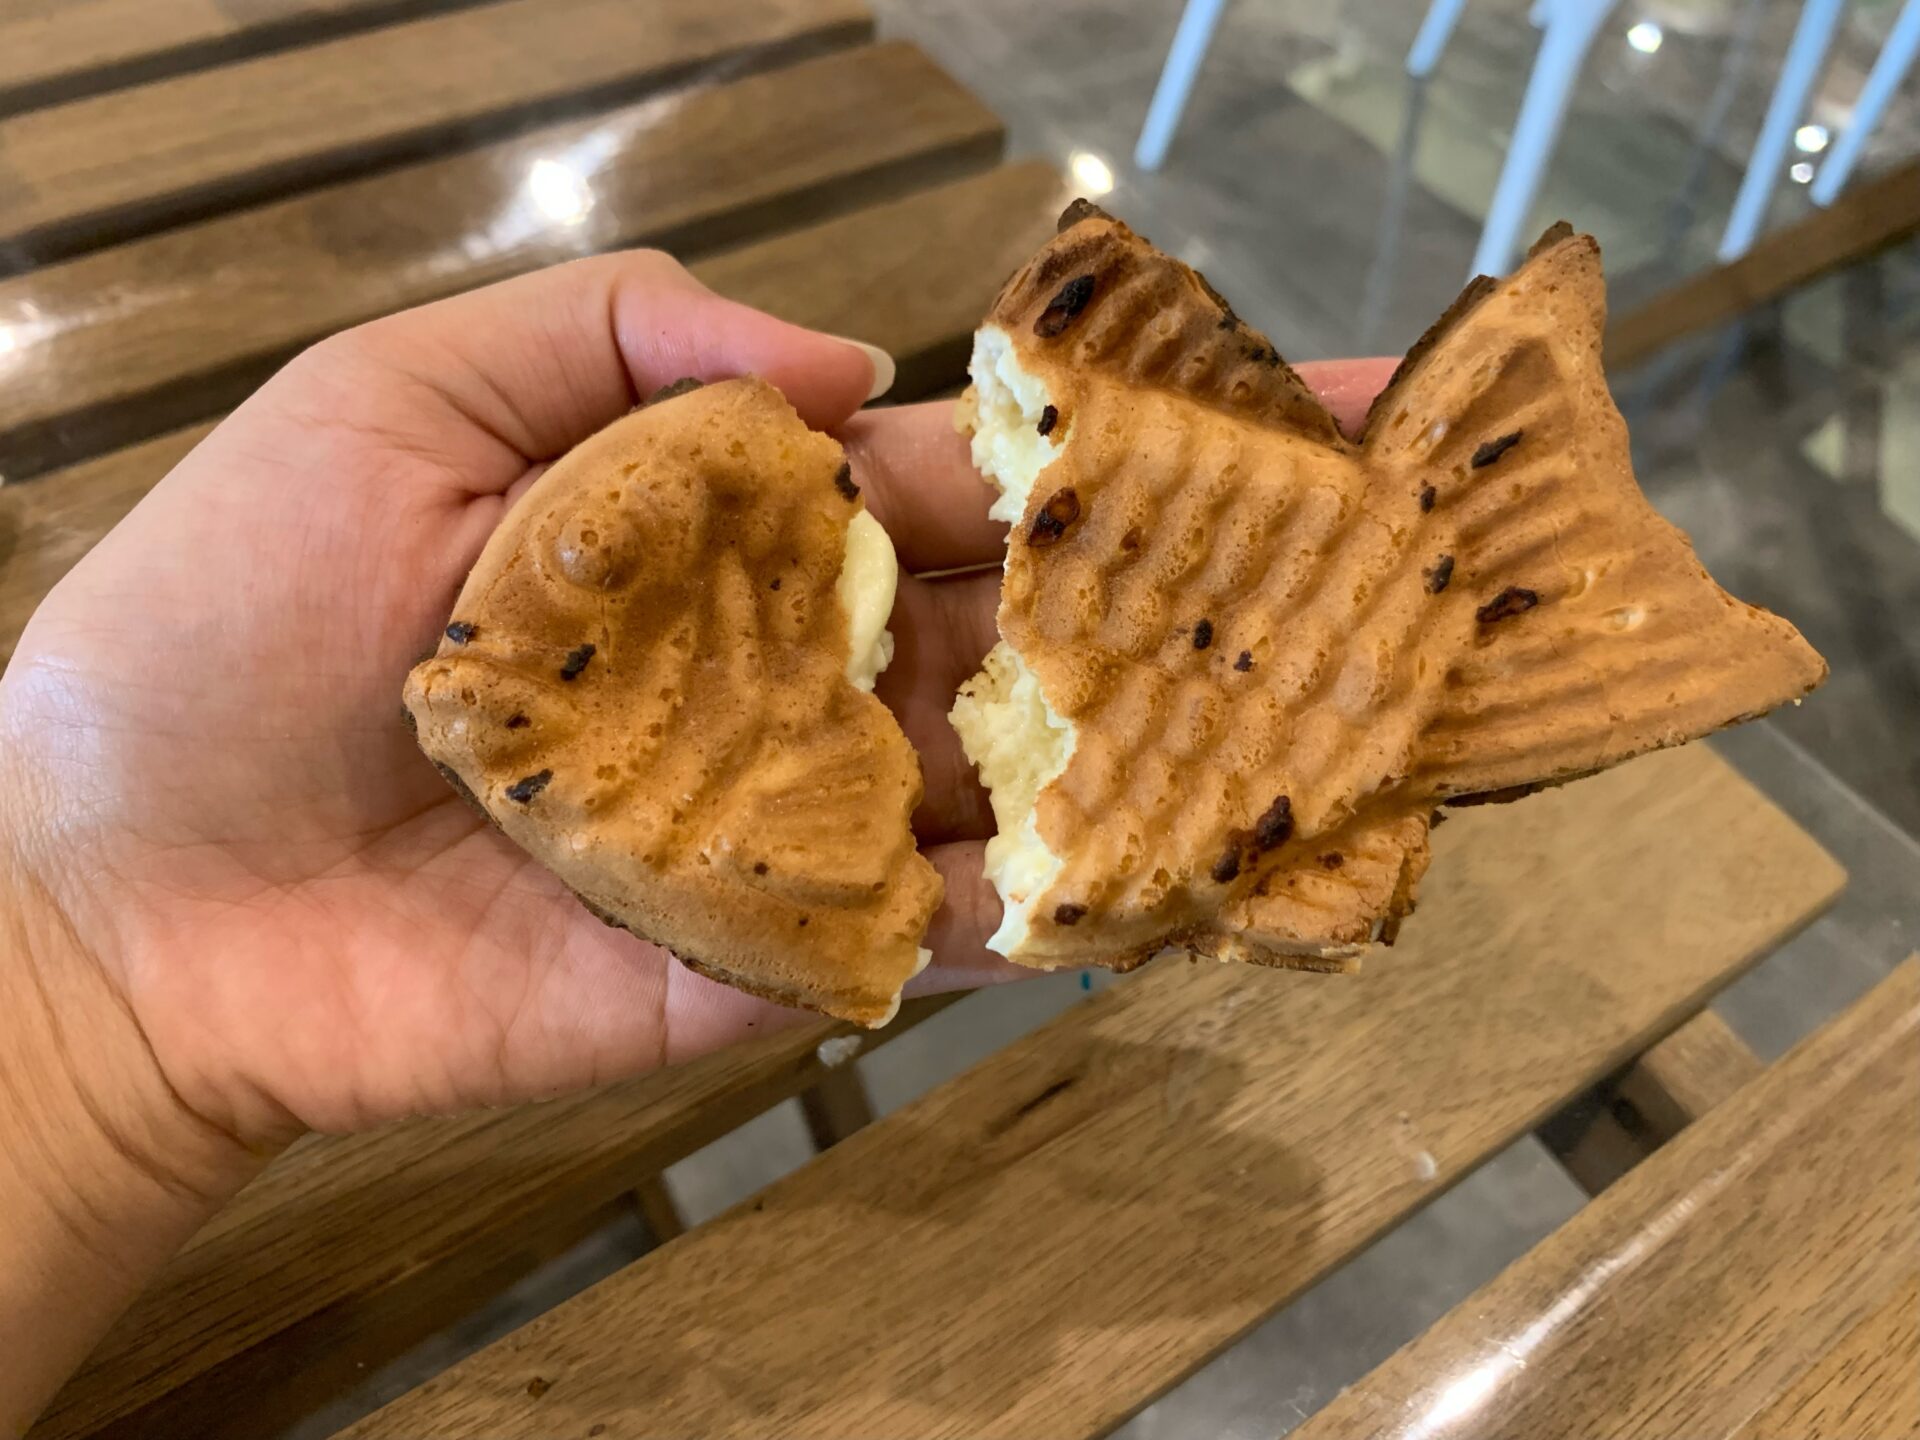 Old Hands Cafeteria - Cream cheese taiyaki cut in half